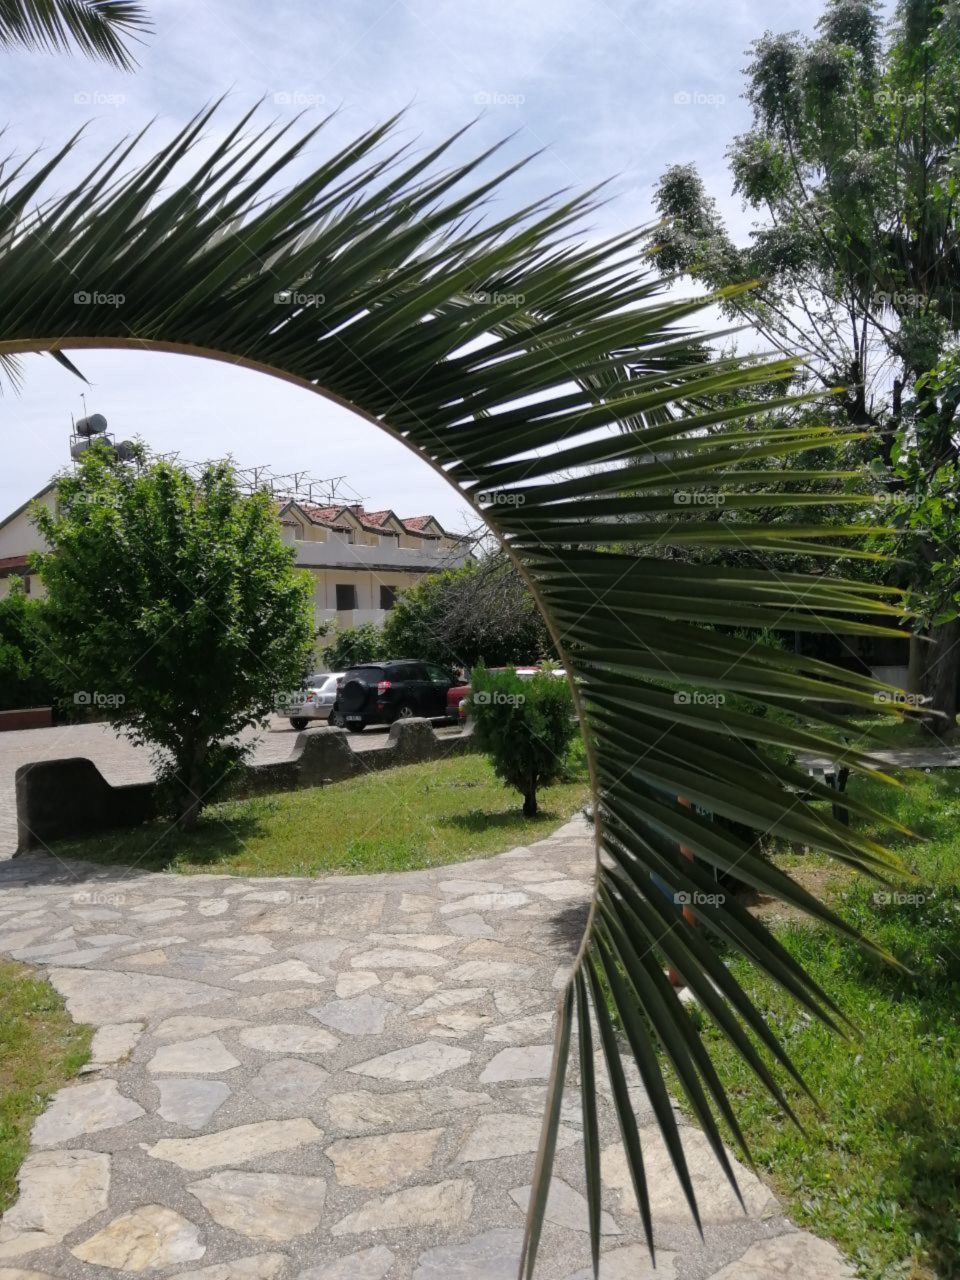 palm branch against the background of the hotel and the stone walkway